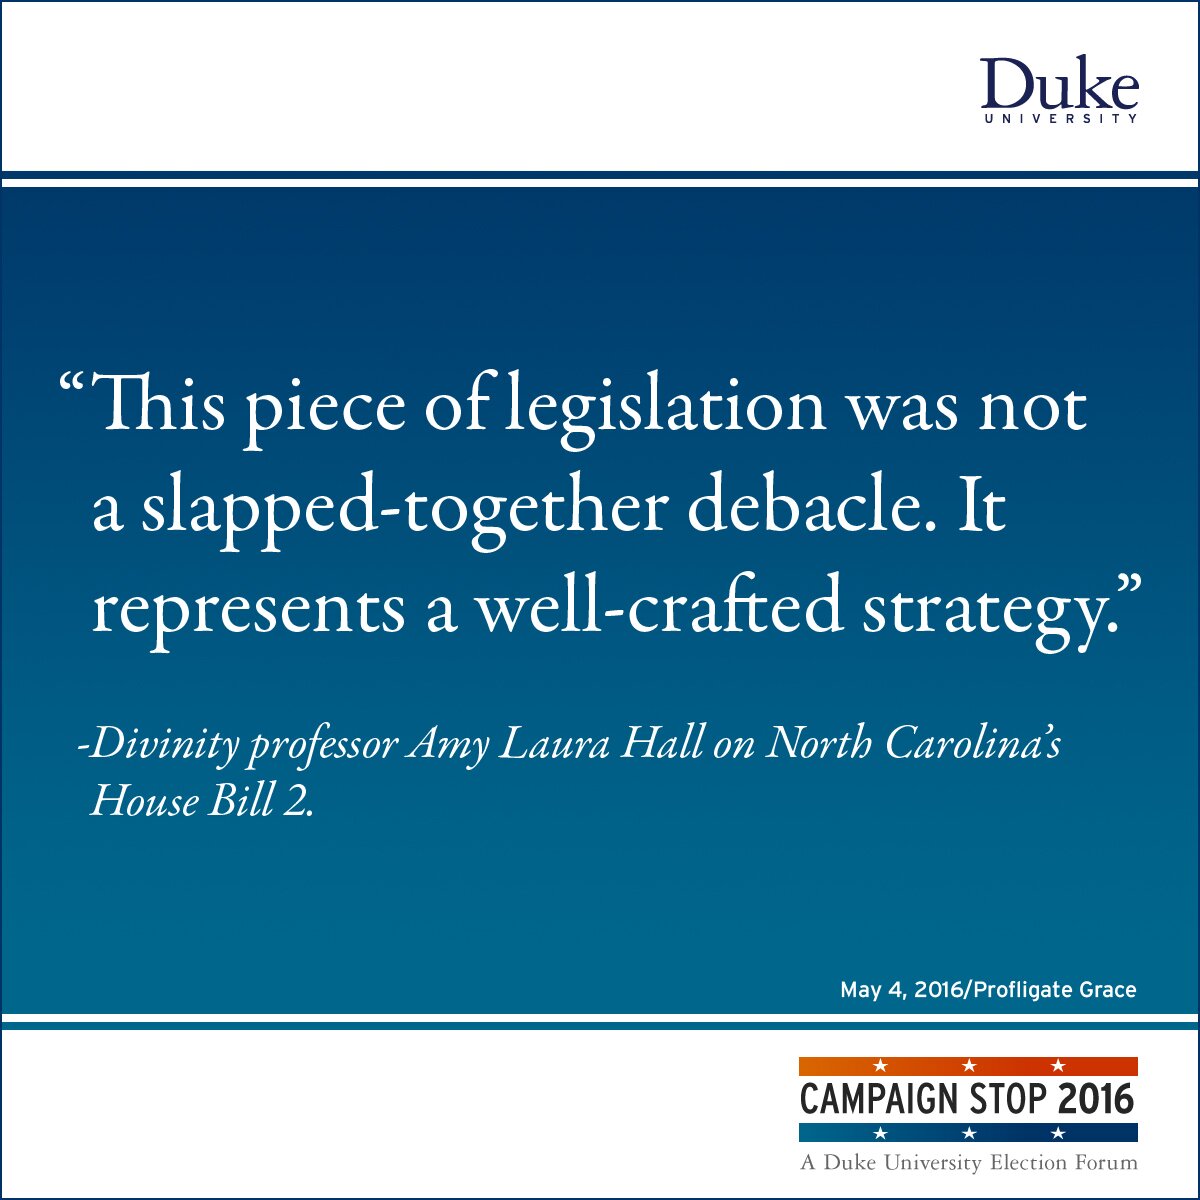 “This piece of legislation was not a slapped-together debacle. It represents a well-crafted strategy.” -Divinity professor Amy Laura Hall on North Carolina’s House Bill 2.